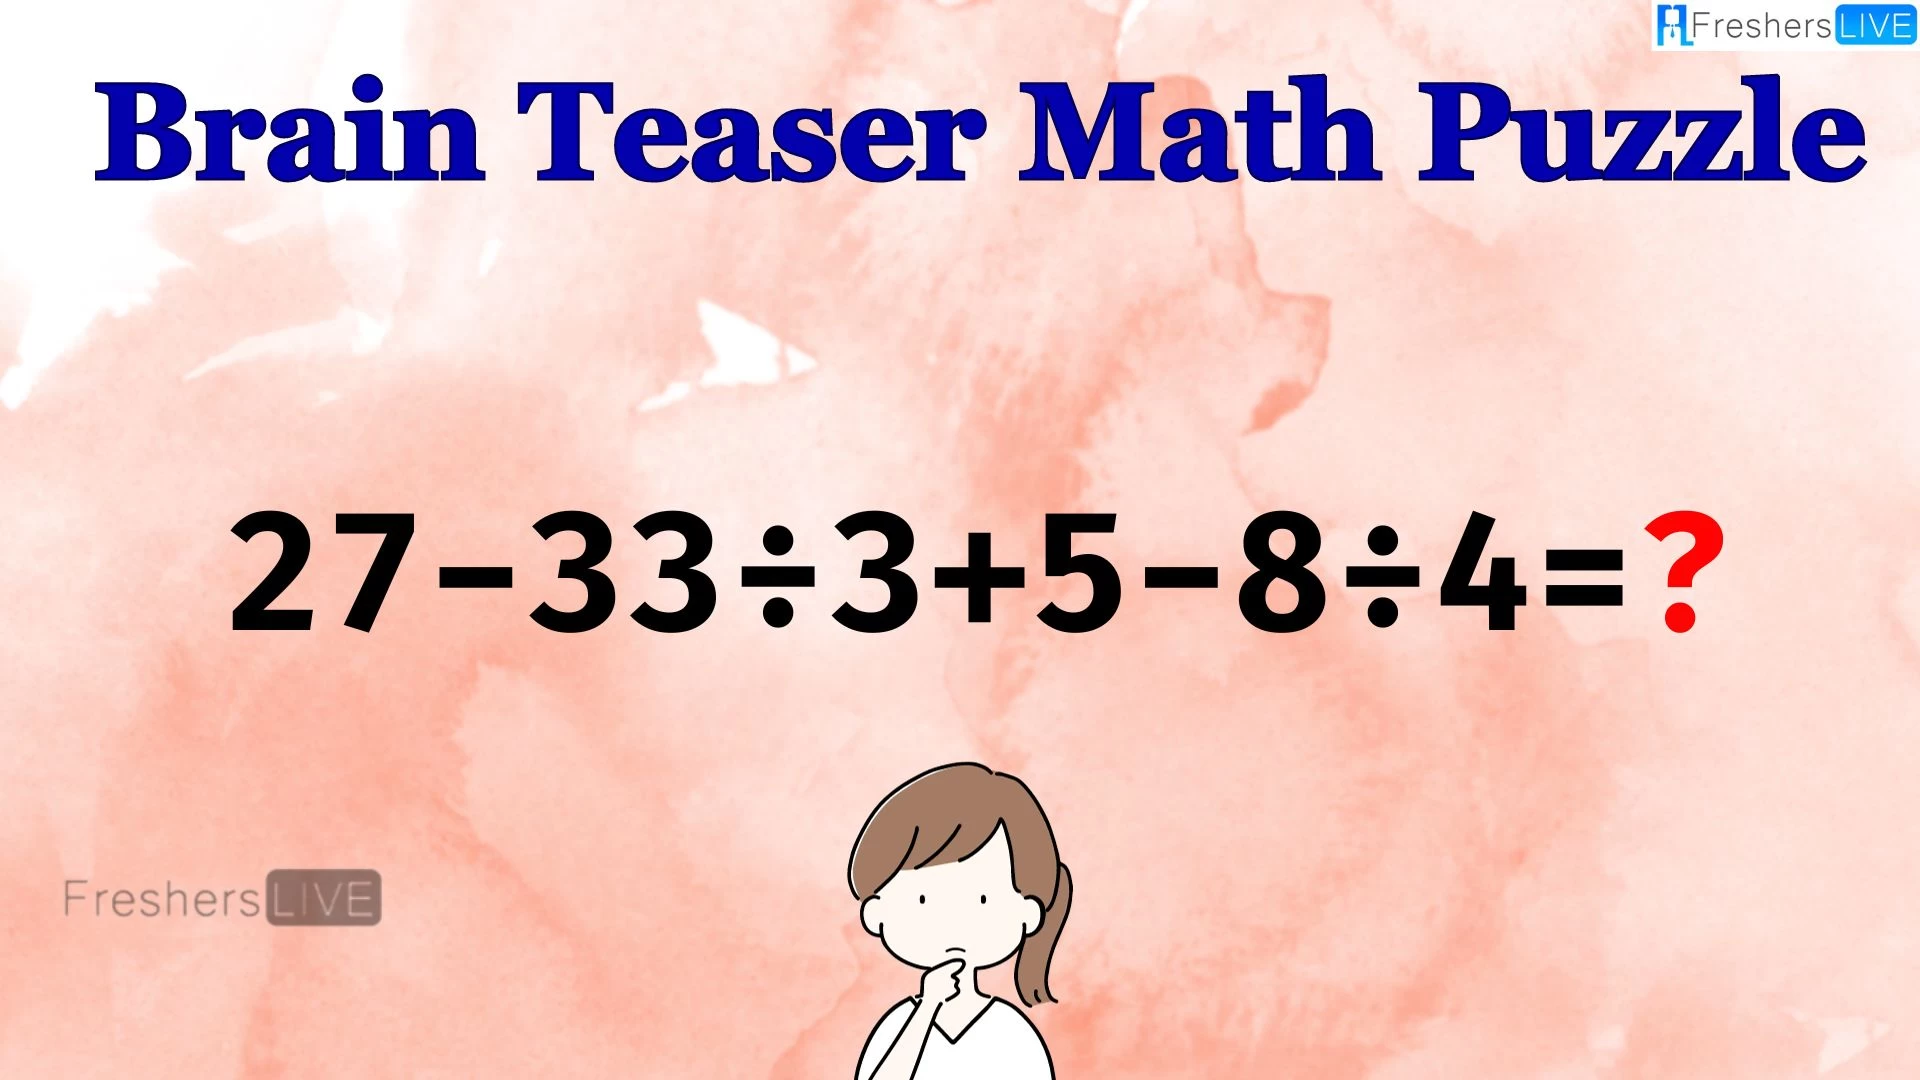 Can You Solve this Math Puzzle? Equate 27-33÷3+5-8÷4=?